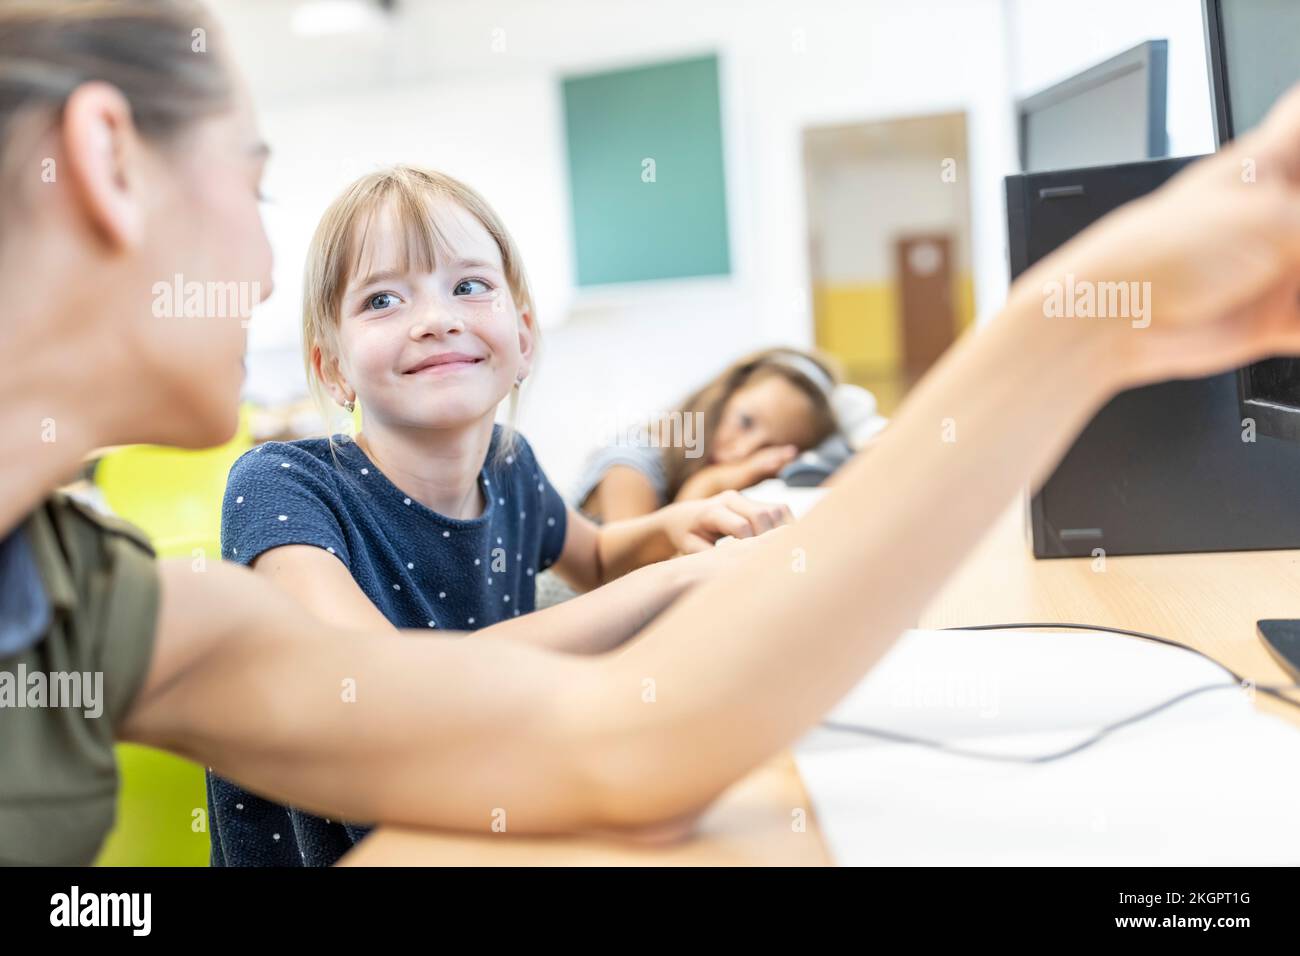 Smiling girl looking at teacher teaching in E-learning class Stock Photo